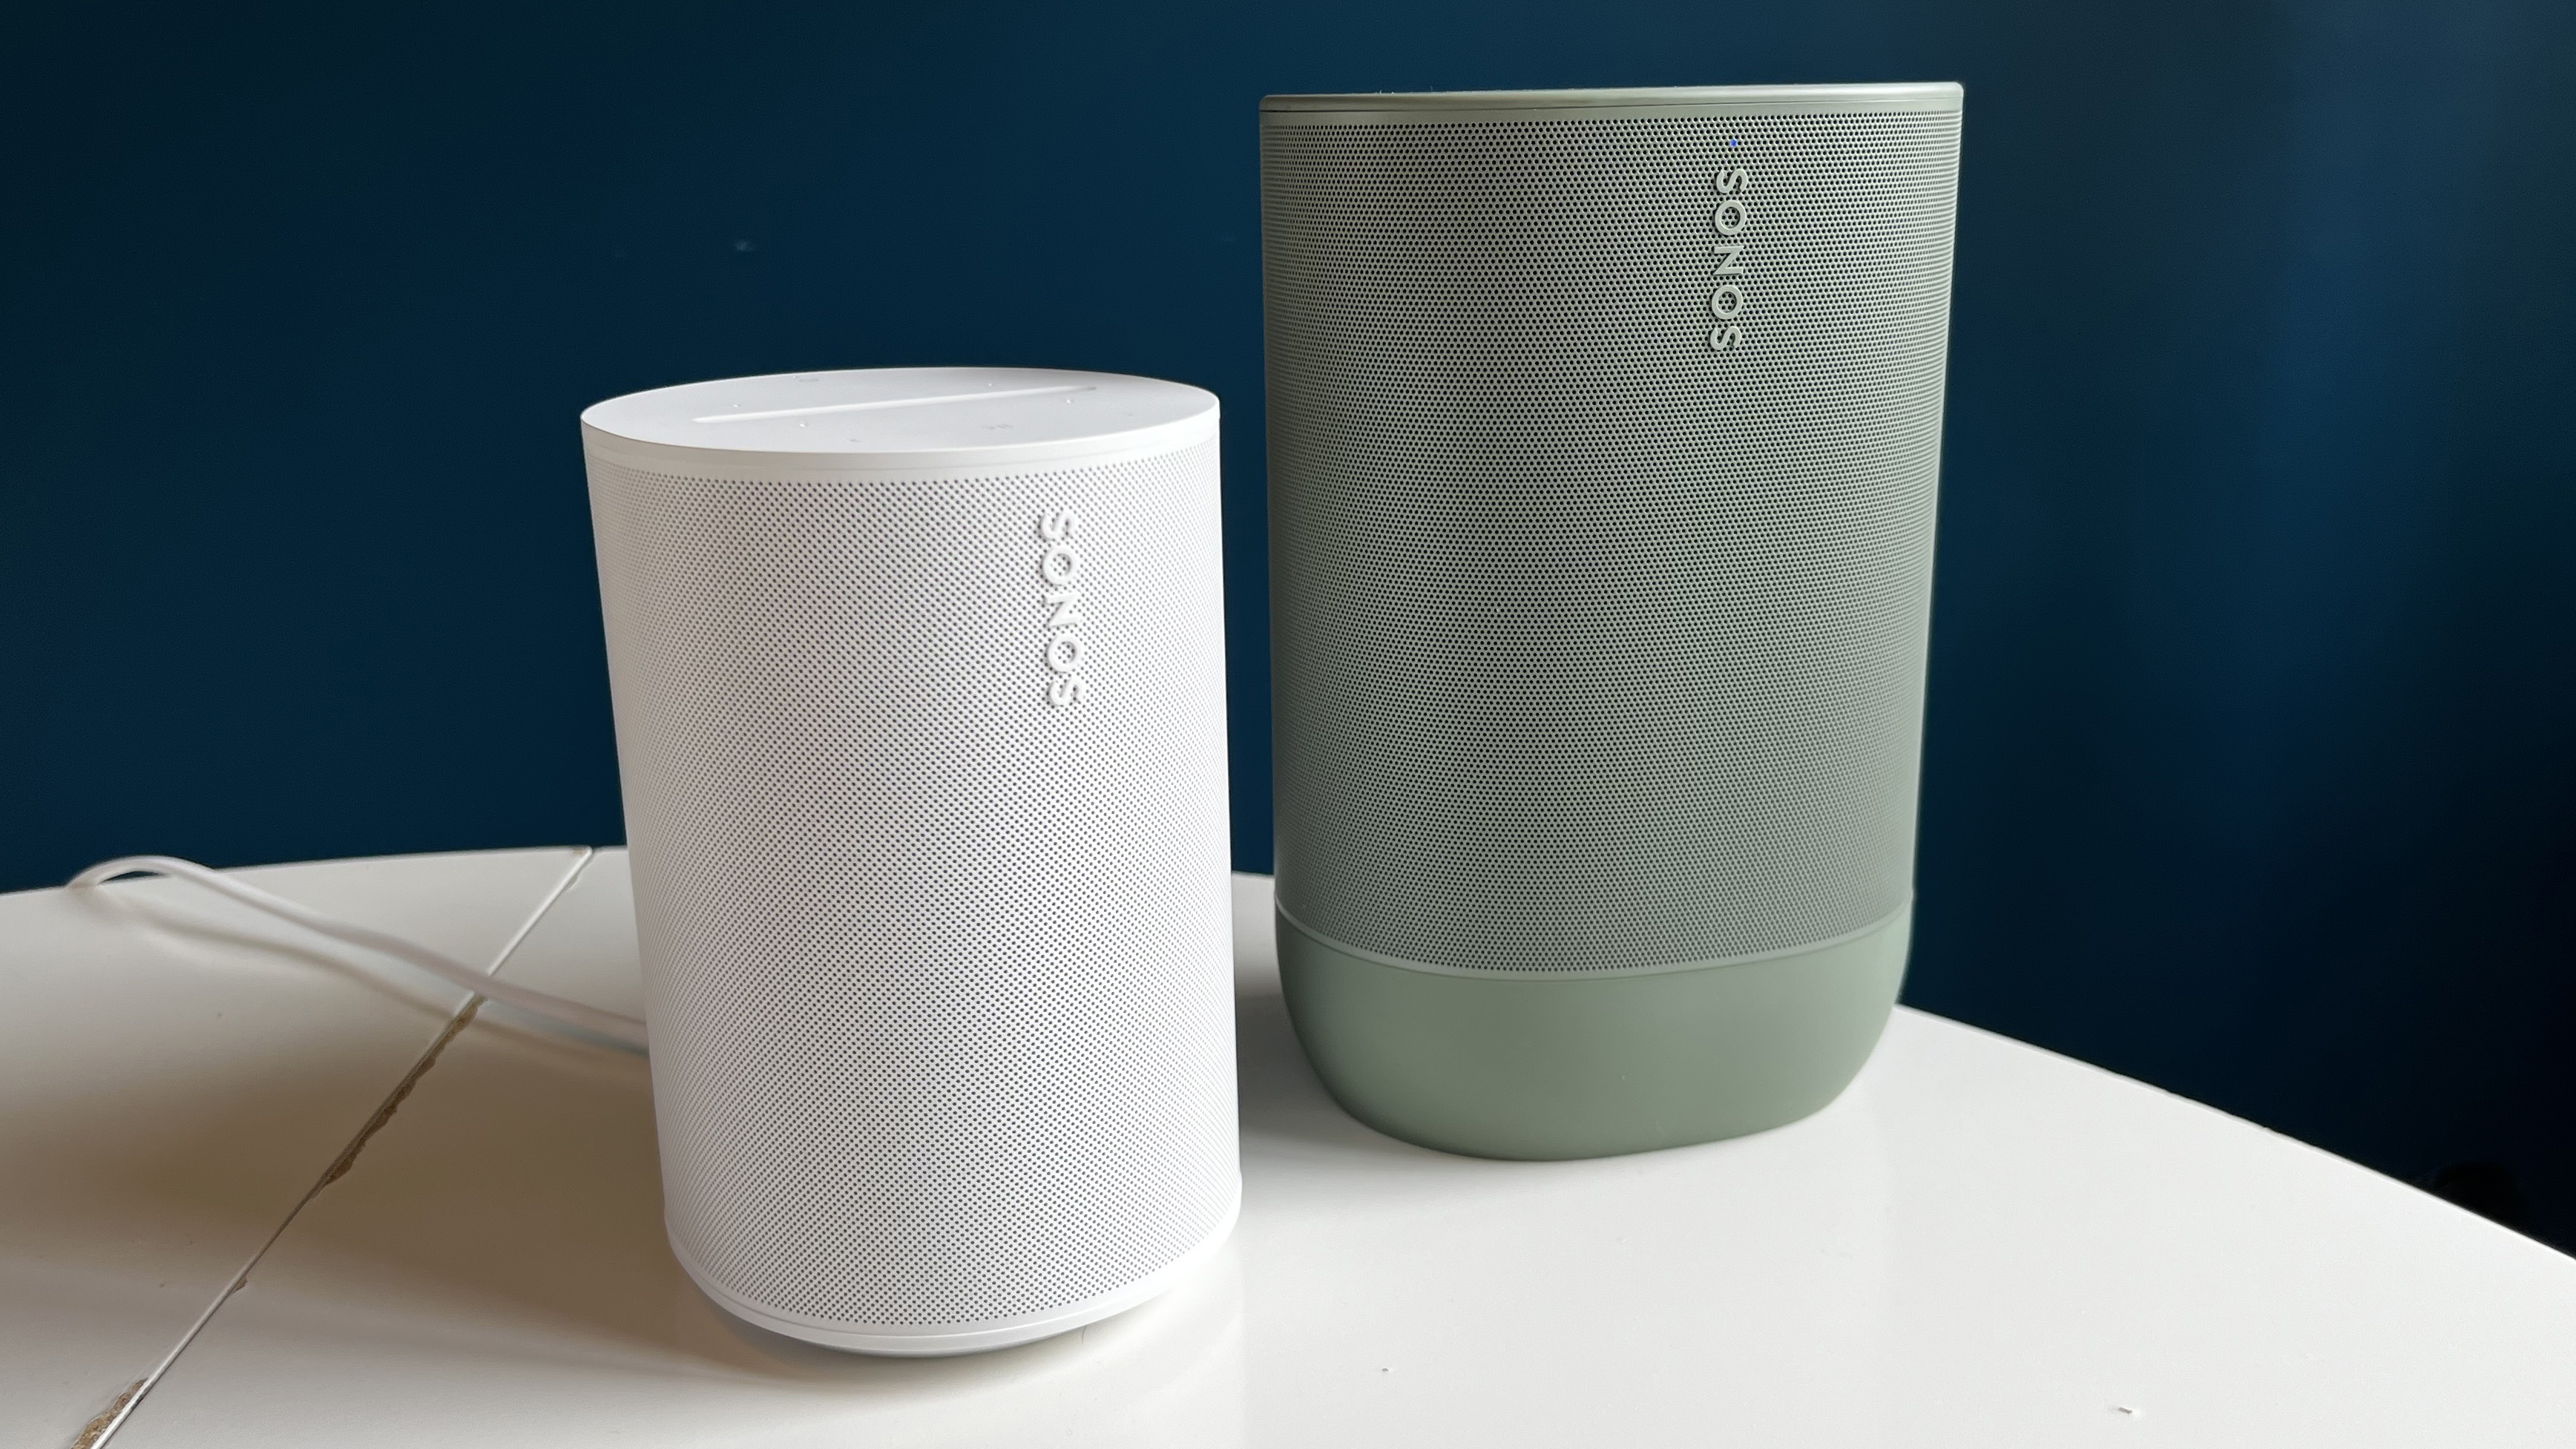 The Sonos Move 2 next to the Sonos era 100, showing how much smaller the Era 100 is